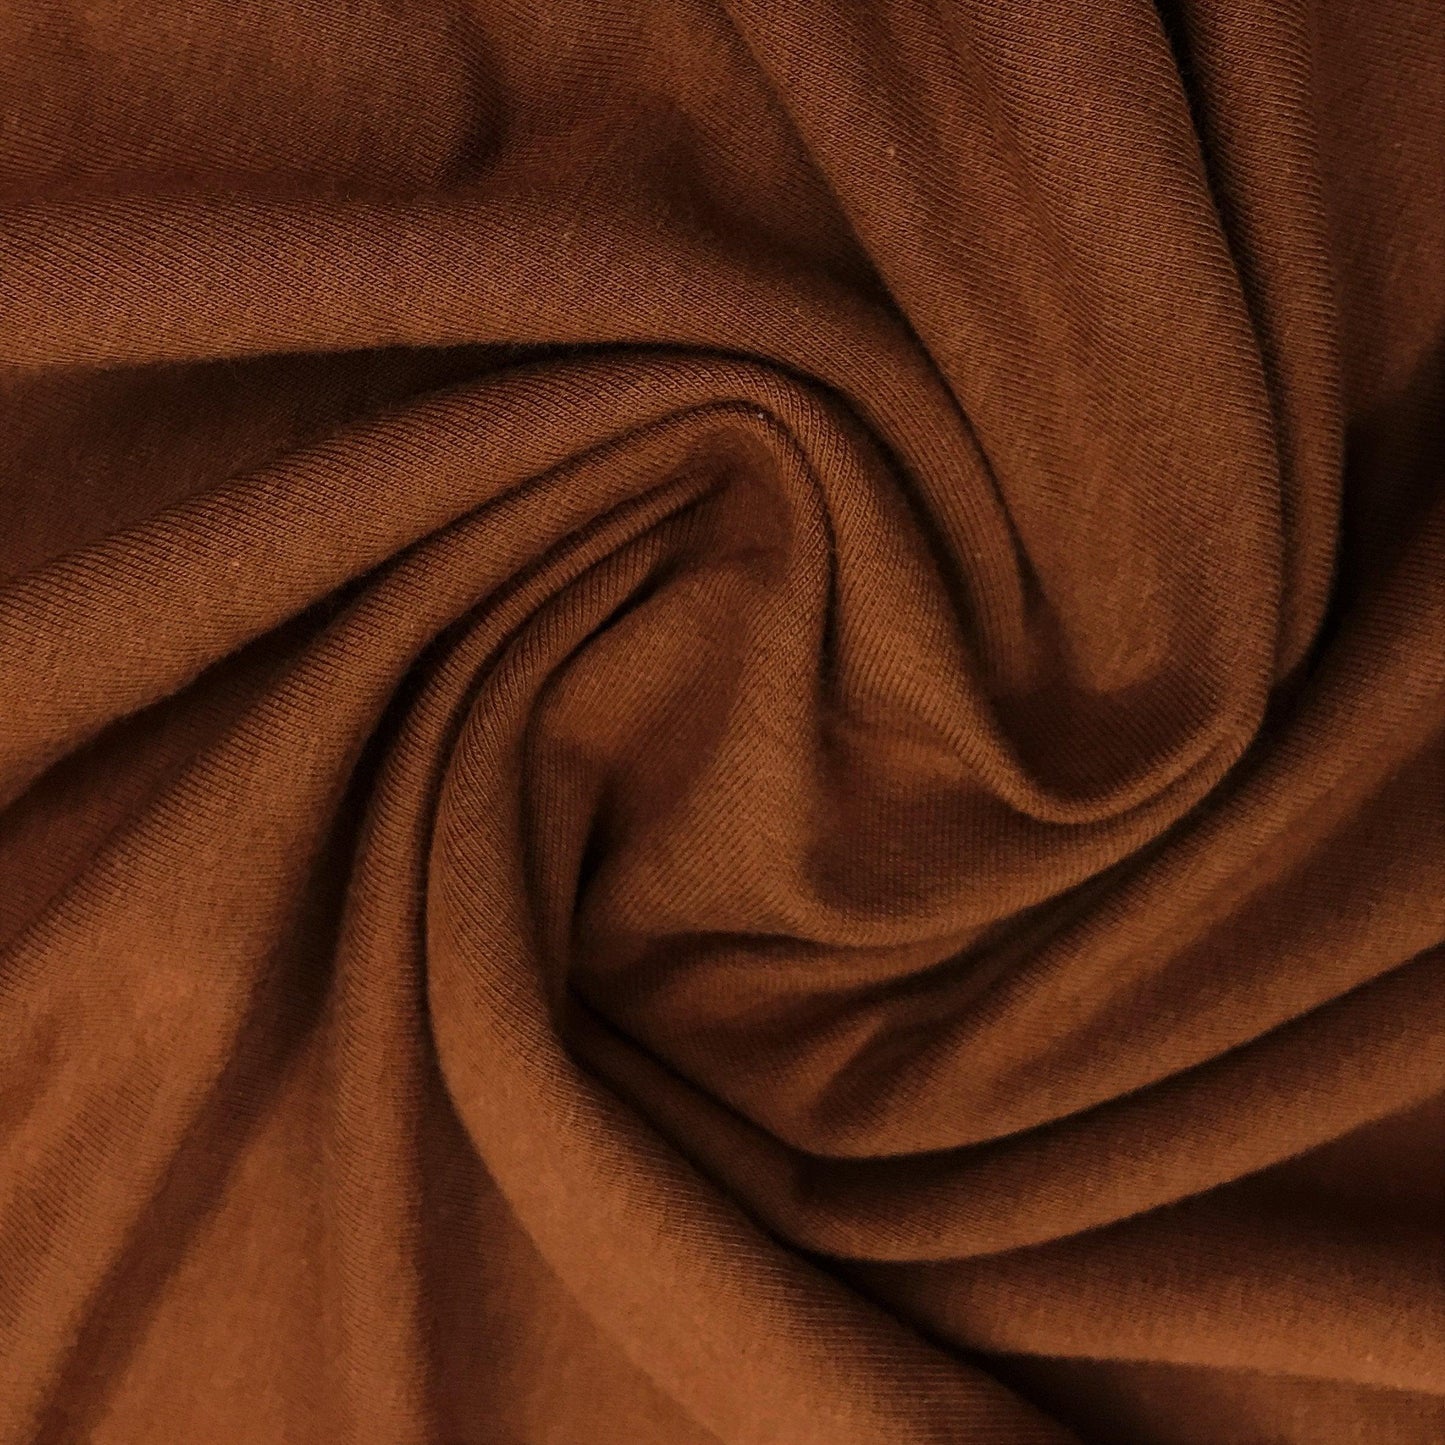 Spice Bamboo/Spandex Jersey Fabric- 240 GSM, $11.35/yd, 15 yards - Nature's Fabrics